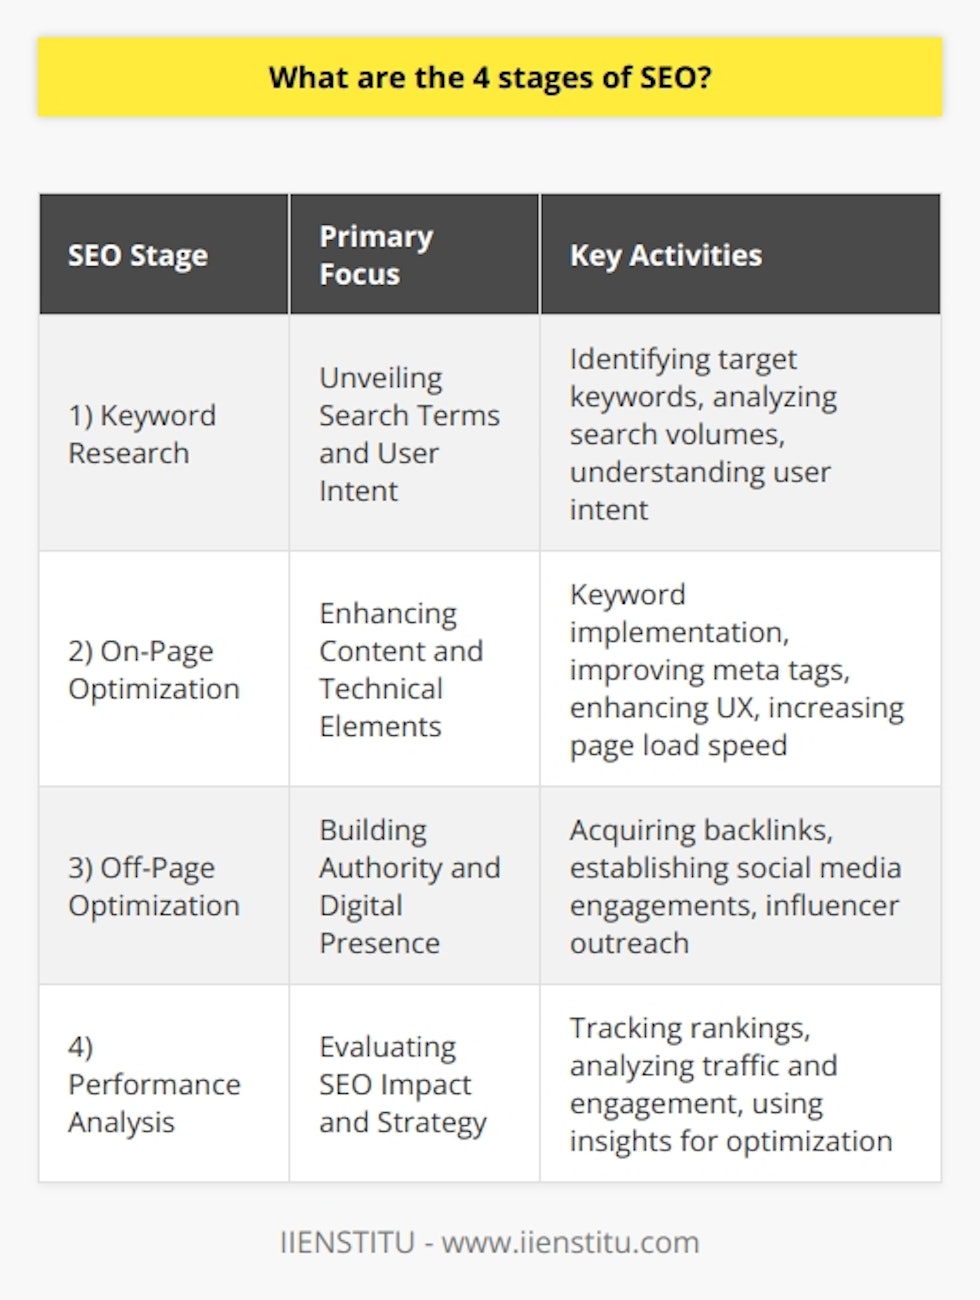 **Introduction to SEO Stages**Search Engine Optimization (SEO) is an essential strategy for improving a website's visibility and securing a higher position on search engine results pages (SERPs). There are four key stages in an SEO campaign: 1) Keyword Research, 2) On-Page Optimization, 3) Off-Page Optimization, and 4) Performance Analysis. These stages collectively work towards enhancing the reach and the effectiveness of a website in organic search results.**Keyword Research: Uncovering Opportunities**The commencement of an SEO journey begins with keyword research. This foundational step is where marketers and SEO specialists invest time in discovering the phrases and questions that potential visitors use in search engines. Effective keyword research goes beyond merely identifying high-volume search terms; it includes understanding the intent behind the queries. It's an intricate process that ideally combines the understanding of the niche, the audience's desires, and the subtleties of language nuances that may not be prevalent online.**On-Page Optimization: Crafting and Sculpting**After pinpointing the keywords, on-page optimization takes the reins. This entails meticulously sculpting a website to ensure it's aligned with keyword strategy and SEO best practices. Beyond keyword inclusion in titles, headings, and within the content itself, this stage also encompasses optimizing technical aspects like meta tags, the user experience (UX), internal linking structure, mobile-friendliness, and page load speeds. Approach this stage as an artisan would, carefully chiseling the website's elements to perfection, ensuring both search engines and users can extract maximum value.**Off-Page Optimization: Networking and Reputation**The third stage stretches beyond a website's boundaries. Off-page optimization is akin to reputation management; it seeks to establish a website’s authority through backlinks, social media presence, and other external signals. Successful off-page SEO involves nurturing relationships with other reputable entities within the digital ecosystem. Think of backlinks as endorsements; the more credible sources vouching for your website, the more trustworthy it appears to search engines. **Performance Analysis: Insightful Evaluations**The final stage is where the SEO strategy is put under a microscope. Performance analysis involves the meticulous assessment of various metrics through tools and data to gauge the success of the implemented SEO tactics. It’s not enough to just have strategies in place; measuring their impact is what truly informs the path ahead. Smart assessment will hinge on quantitative data such as rankings, traffic volumes, and engagement rates, as well as qualitative insights to understand how users interact with the site.In closing, the intricacies of SEO are best navigated through a structured, stage-by-stage process. Each stage is critical: keyword research establishes the pathway, on-page optimization paves the road, off-page optimization constructs the highway's reputation, and performance analysis provides the map for continuous journey improvements. When these stages are executed with precision, they create a bedrock for digital success, enhancing a website's search engine ranking and ensuring its content resonates with the intended audience.